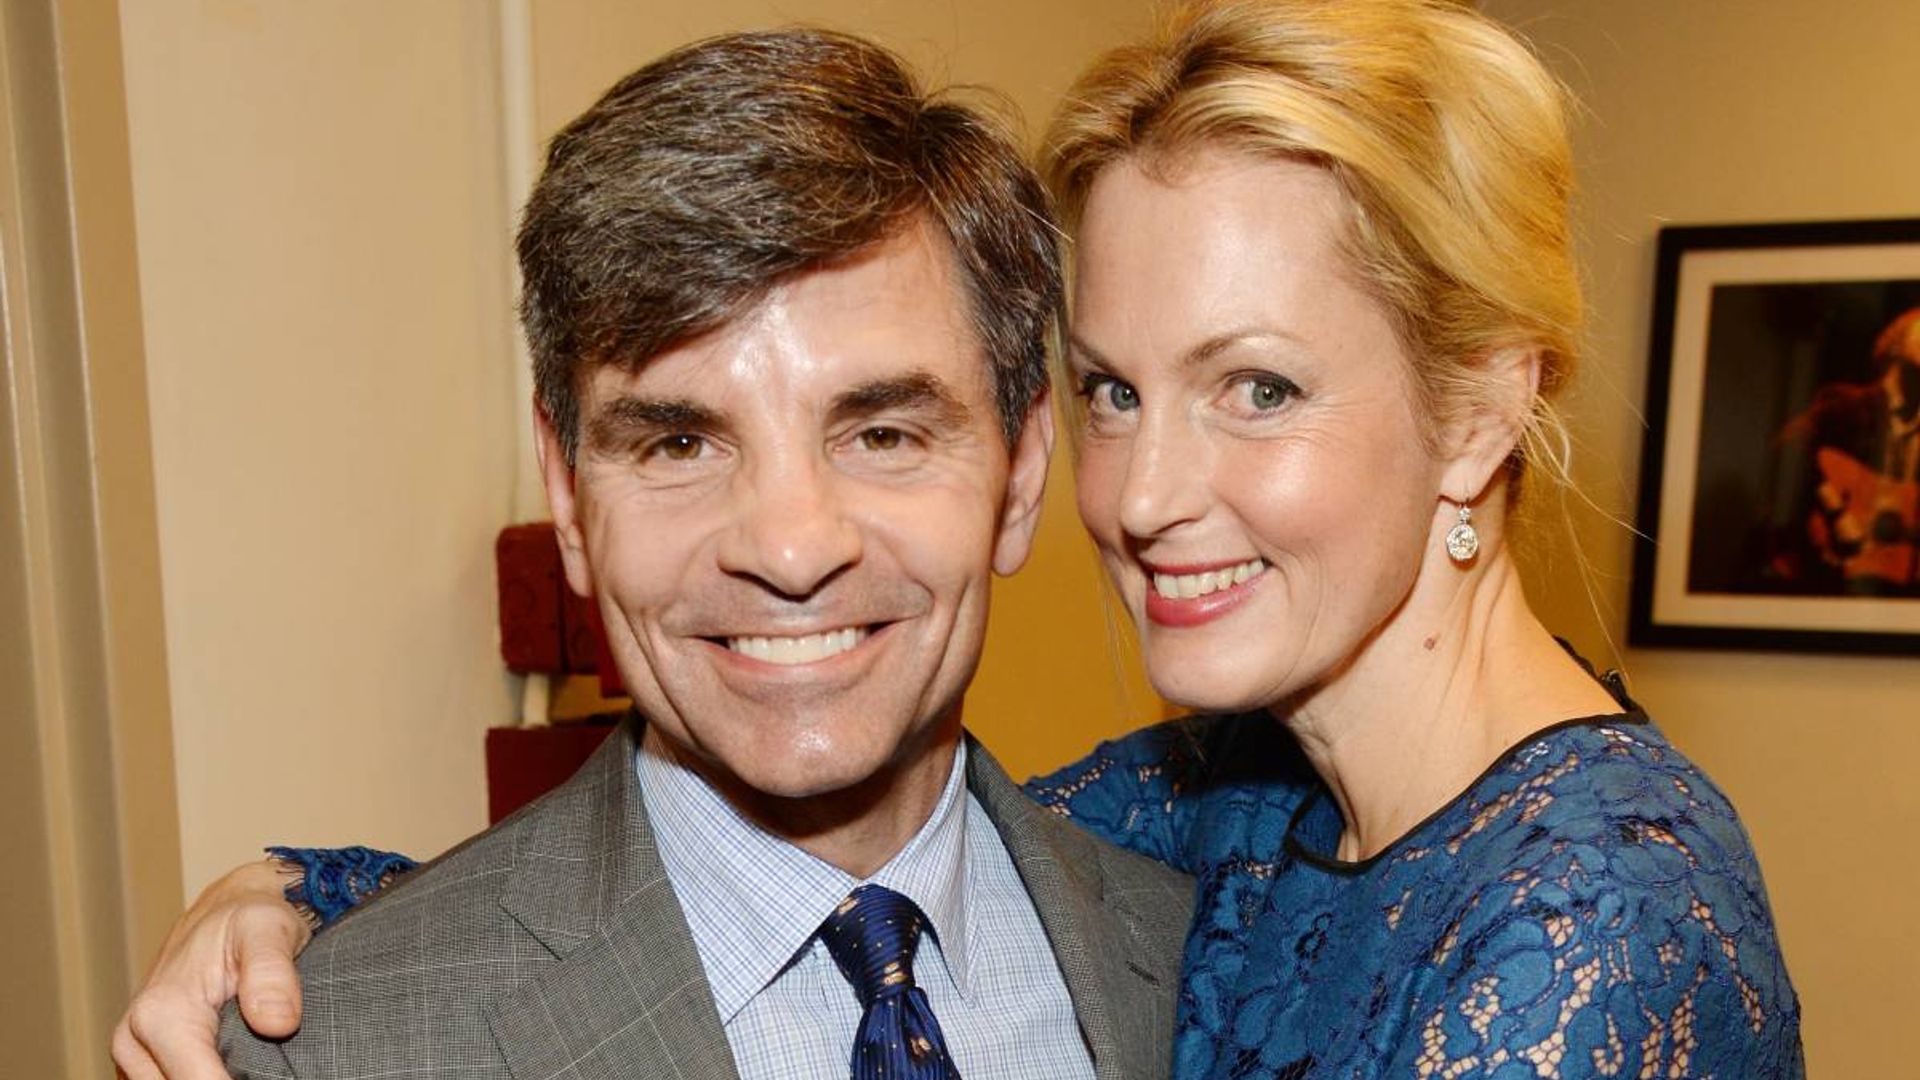 George Stephanopoulos and Ali Wentworth co-ordinate in stylish date night photo